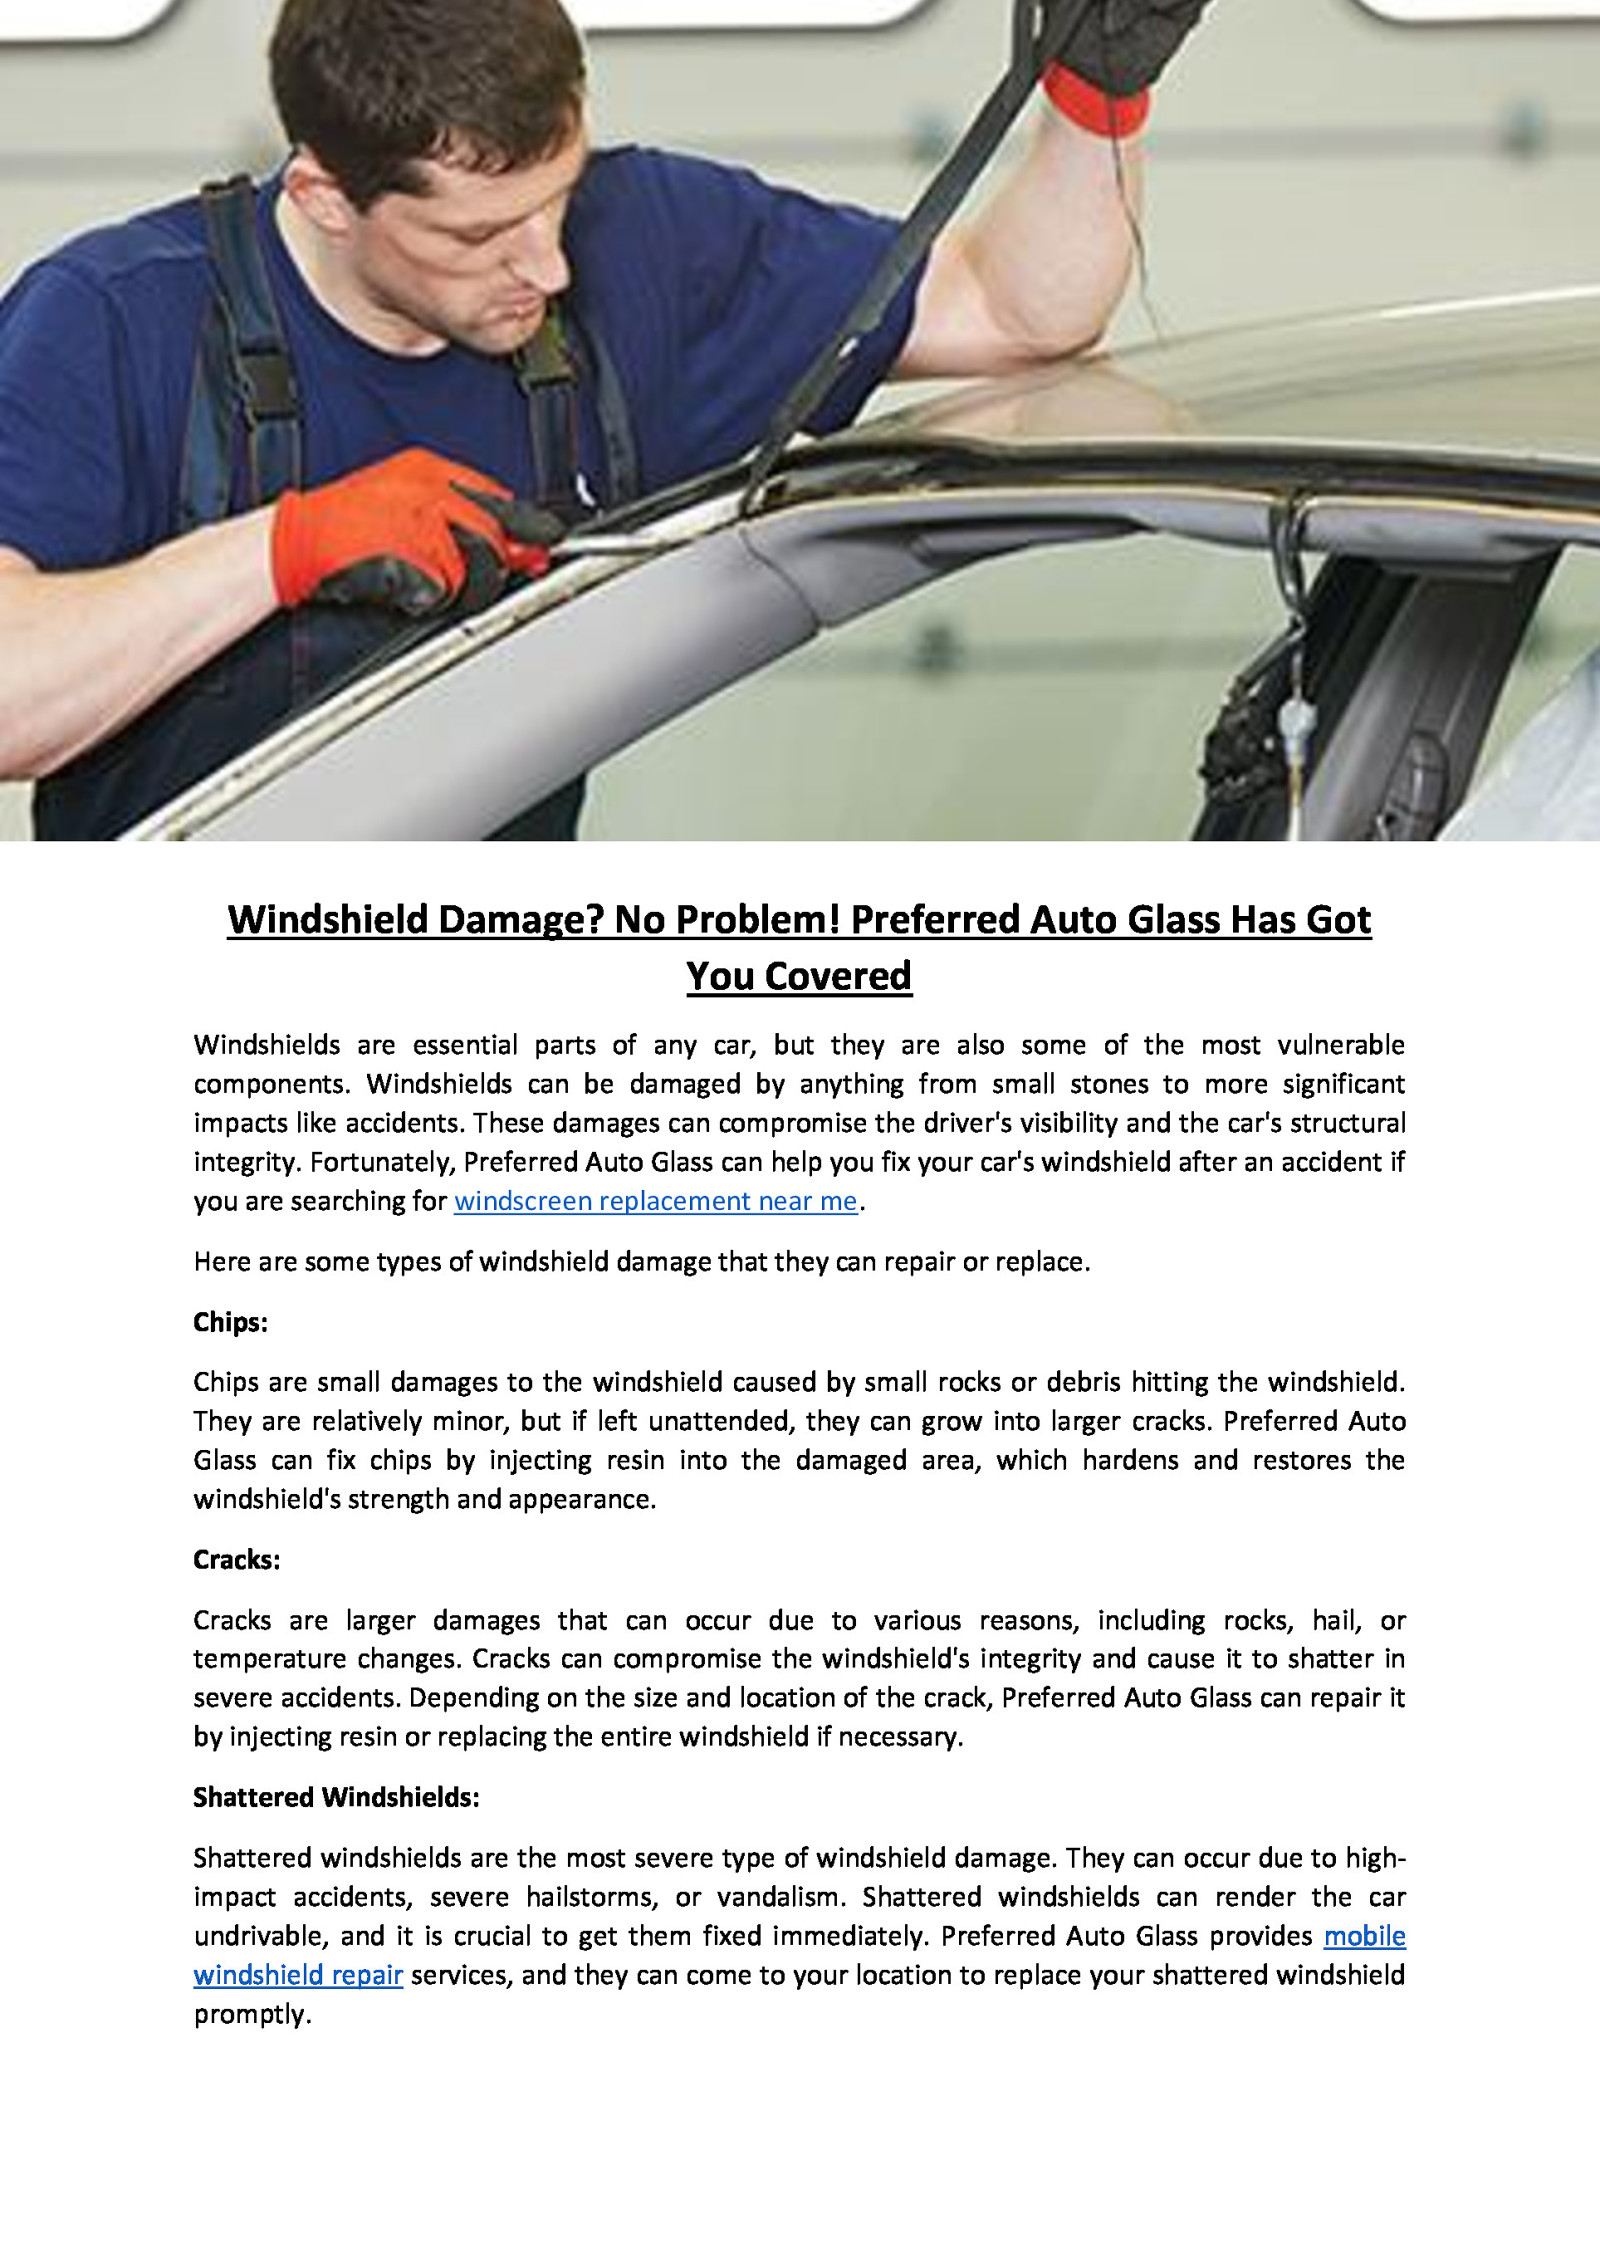 Windshield Damage? No Problem! Preferred Auto Glass Has Got You Covered